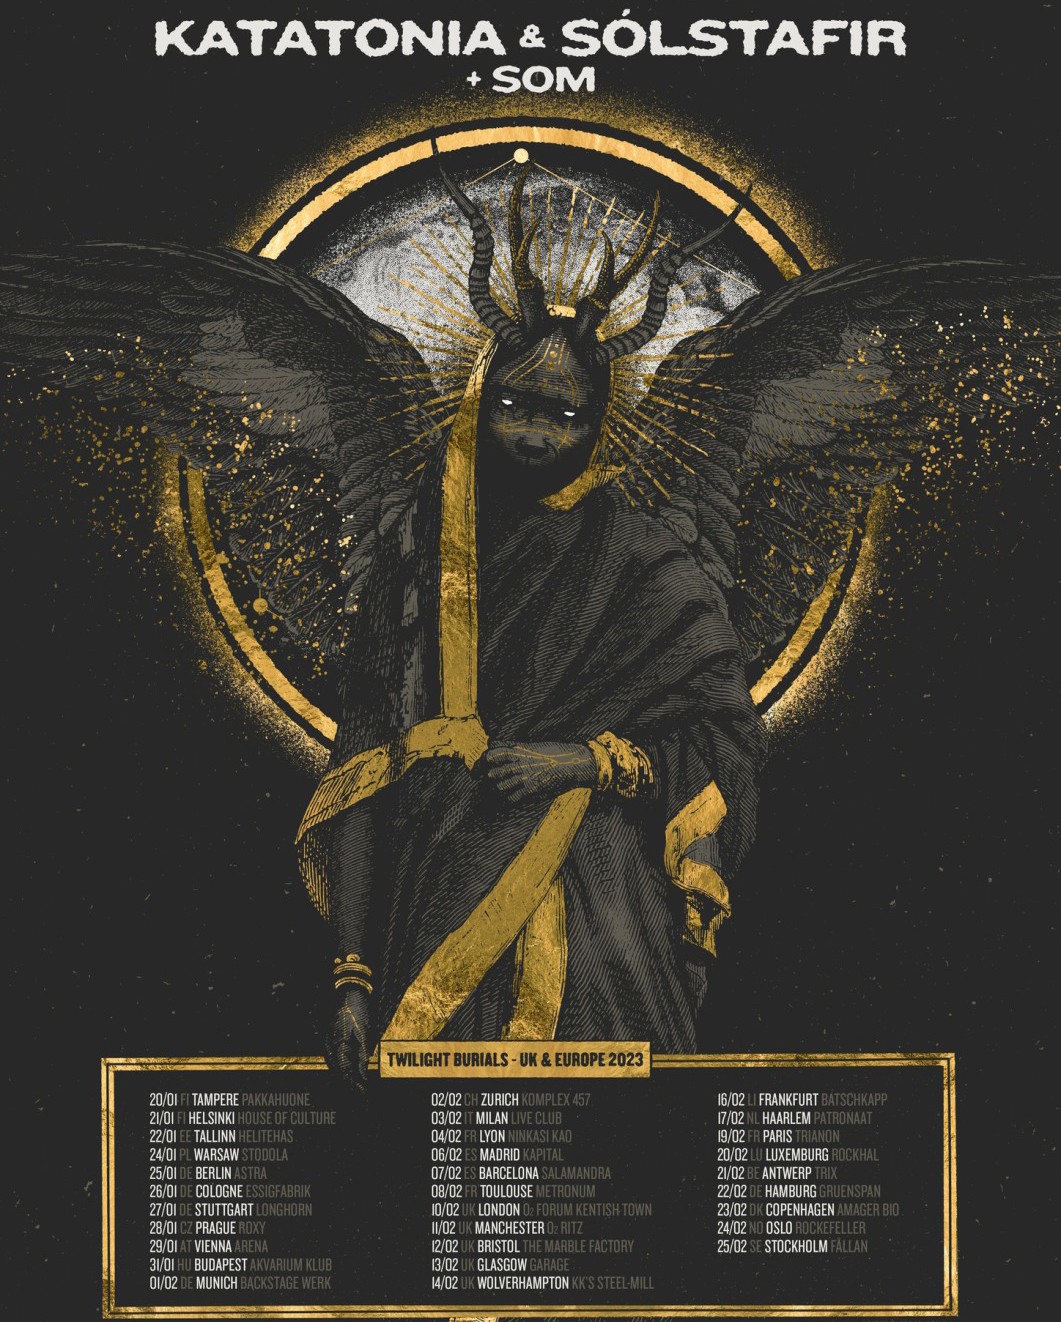 In January and February 2023, Katatonia will tour Europe with Sólstafir and SOM.